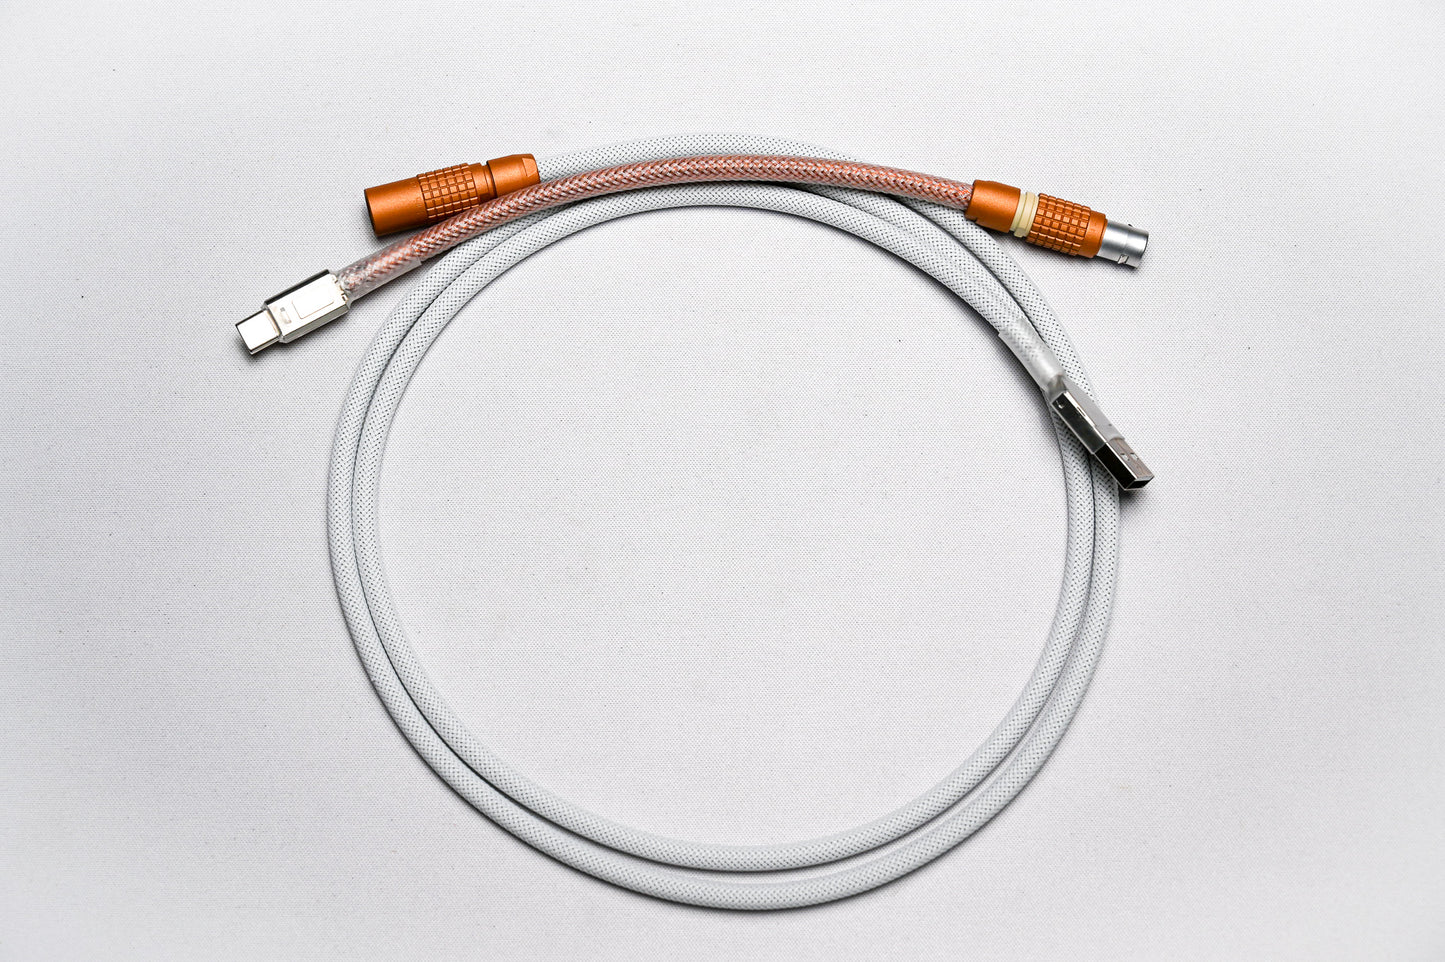 Keebstuff Pale Peach Cable